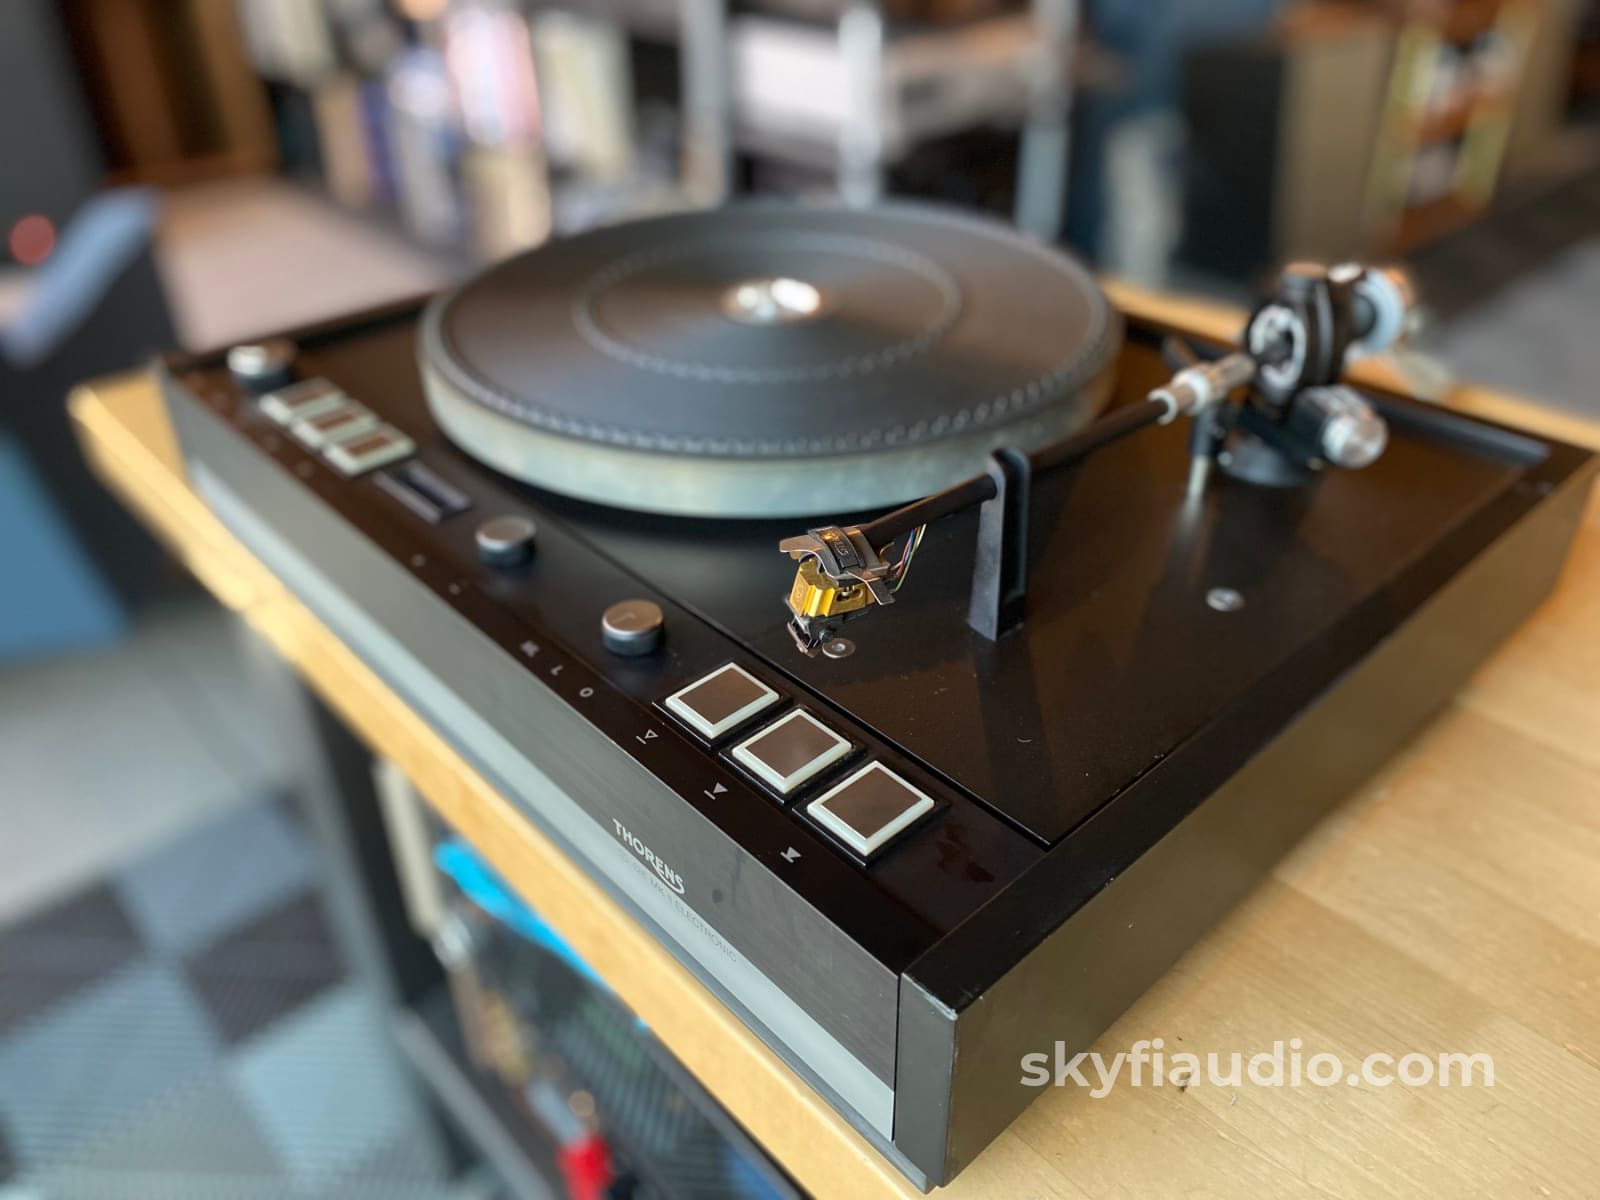 Thorens Td126 Mkii Vintage Turntable With Shure Ultra 500 Cartridge